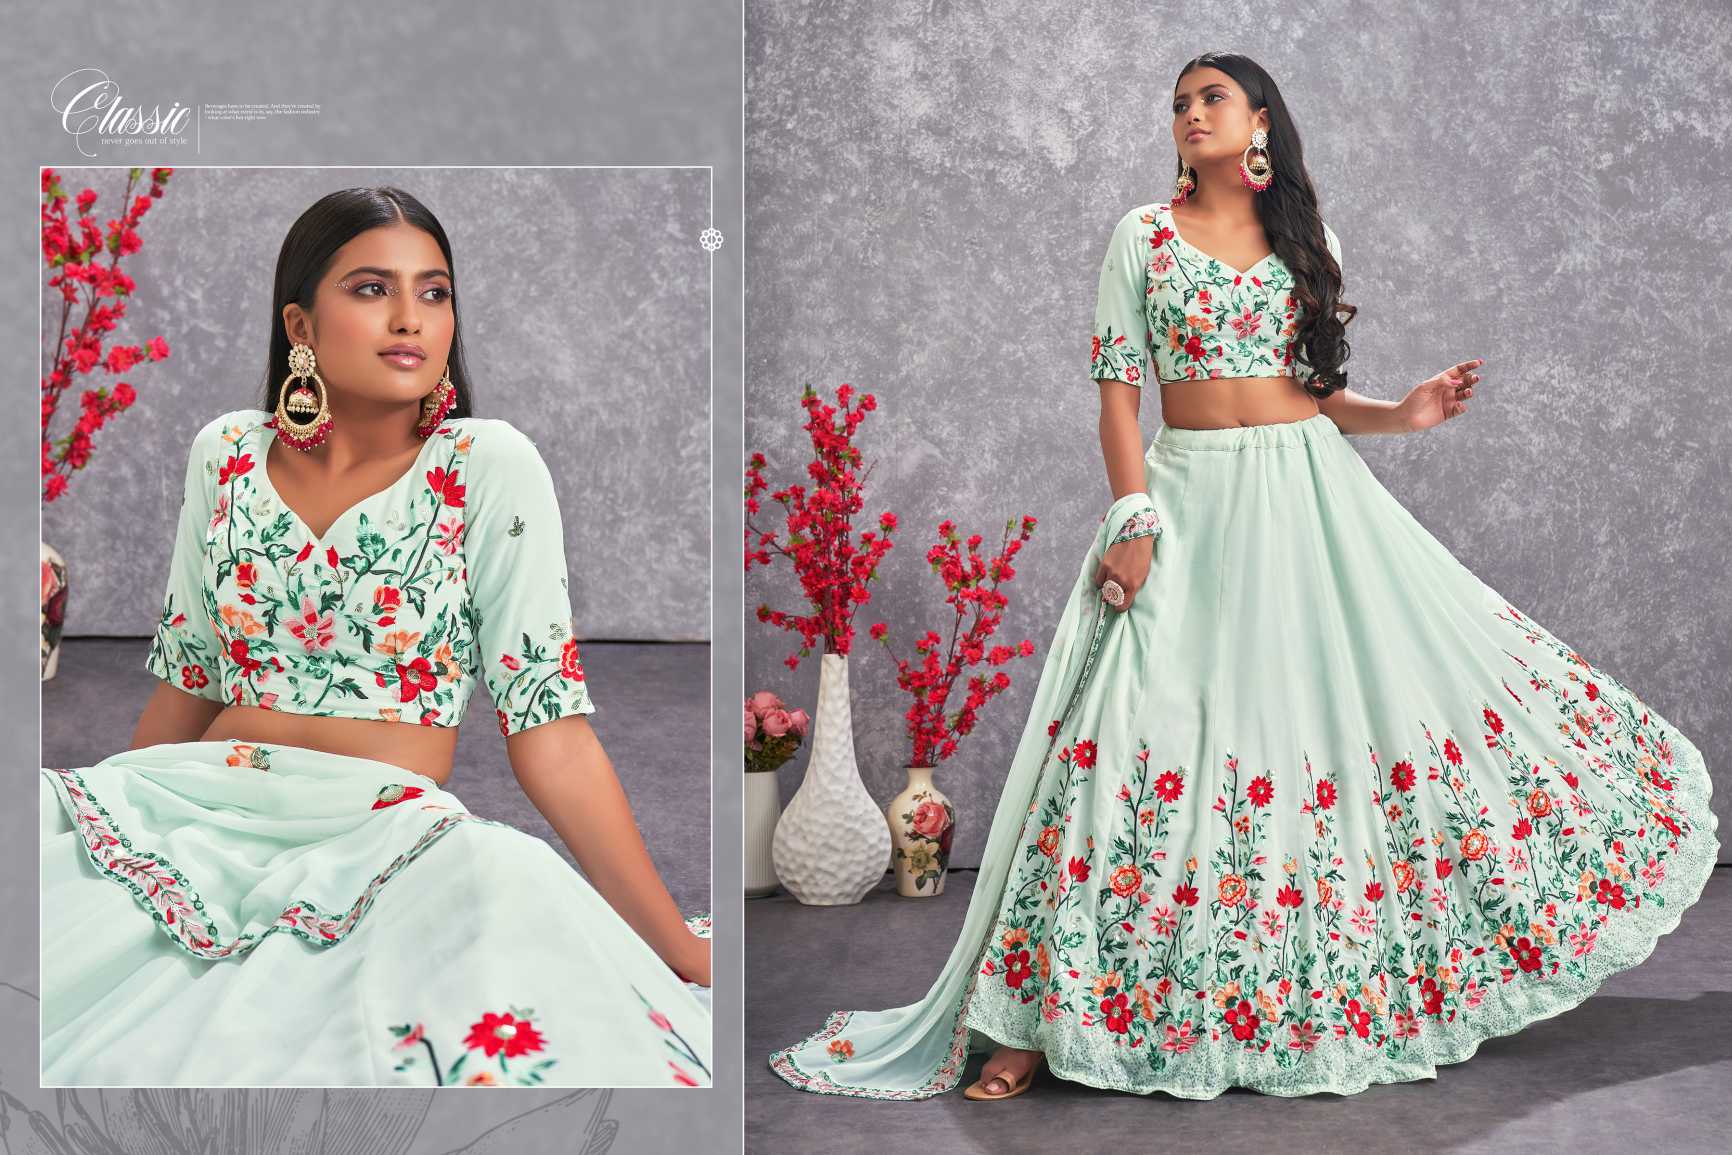 Buy Fab Viva Women's White & Pink Color Georgette Floral Printed  Semi-Stitched Lehenga Choli Set | Georgette Lehenga Choli | Printed Lehenga  Design (White & Pink) at Amazon.in